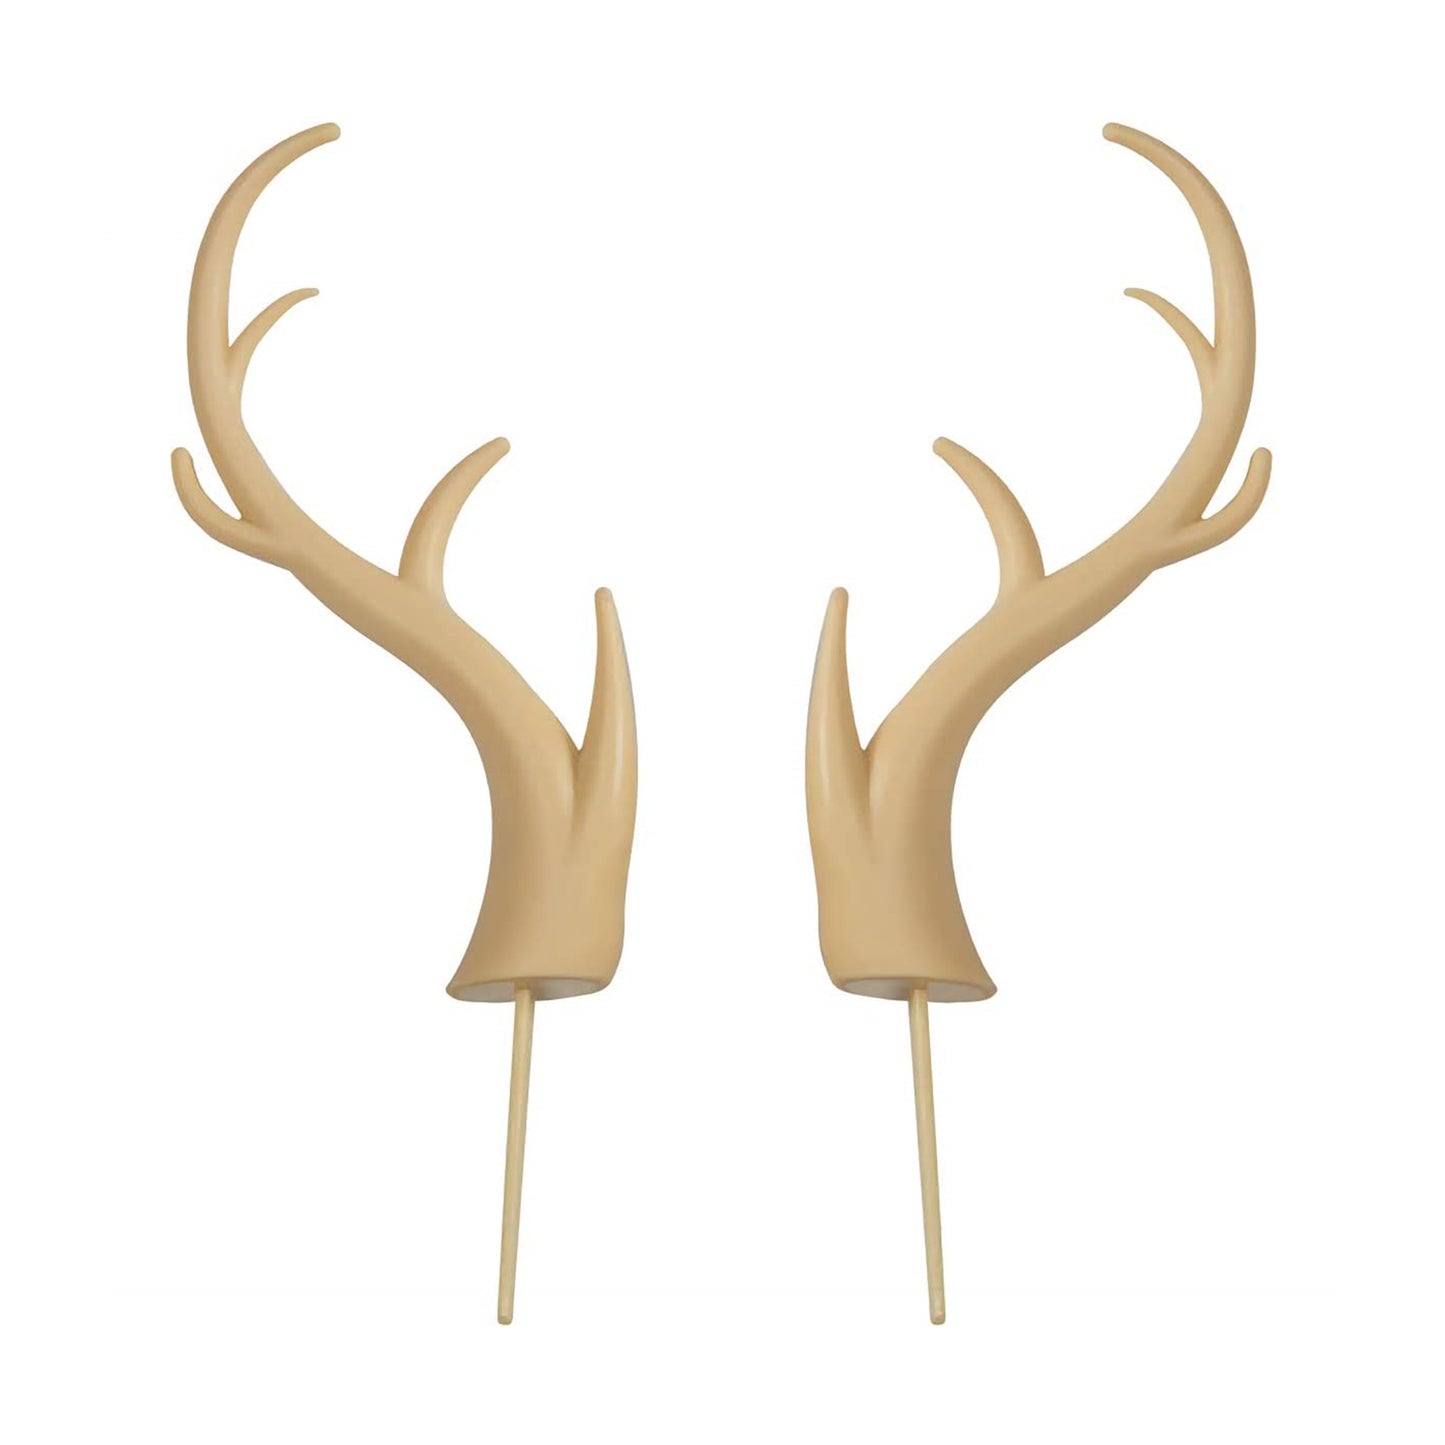 A set of deer antler cake toppers, providing a rustic and outdoorsy charm to cakes, perfect for hunter-themed events or nature-inspired wedding cakes.